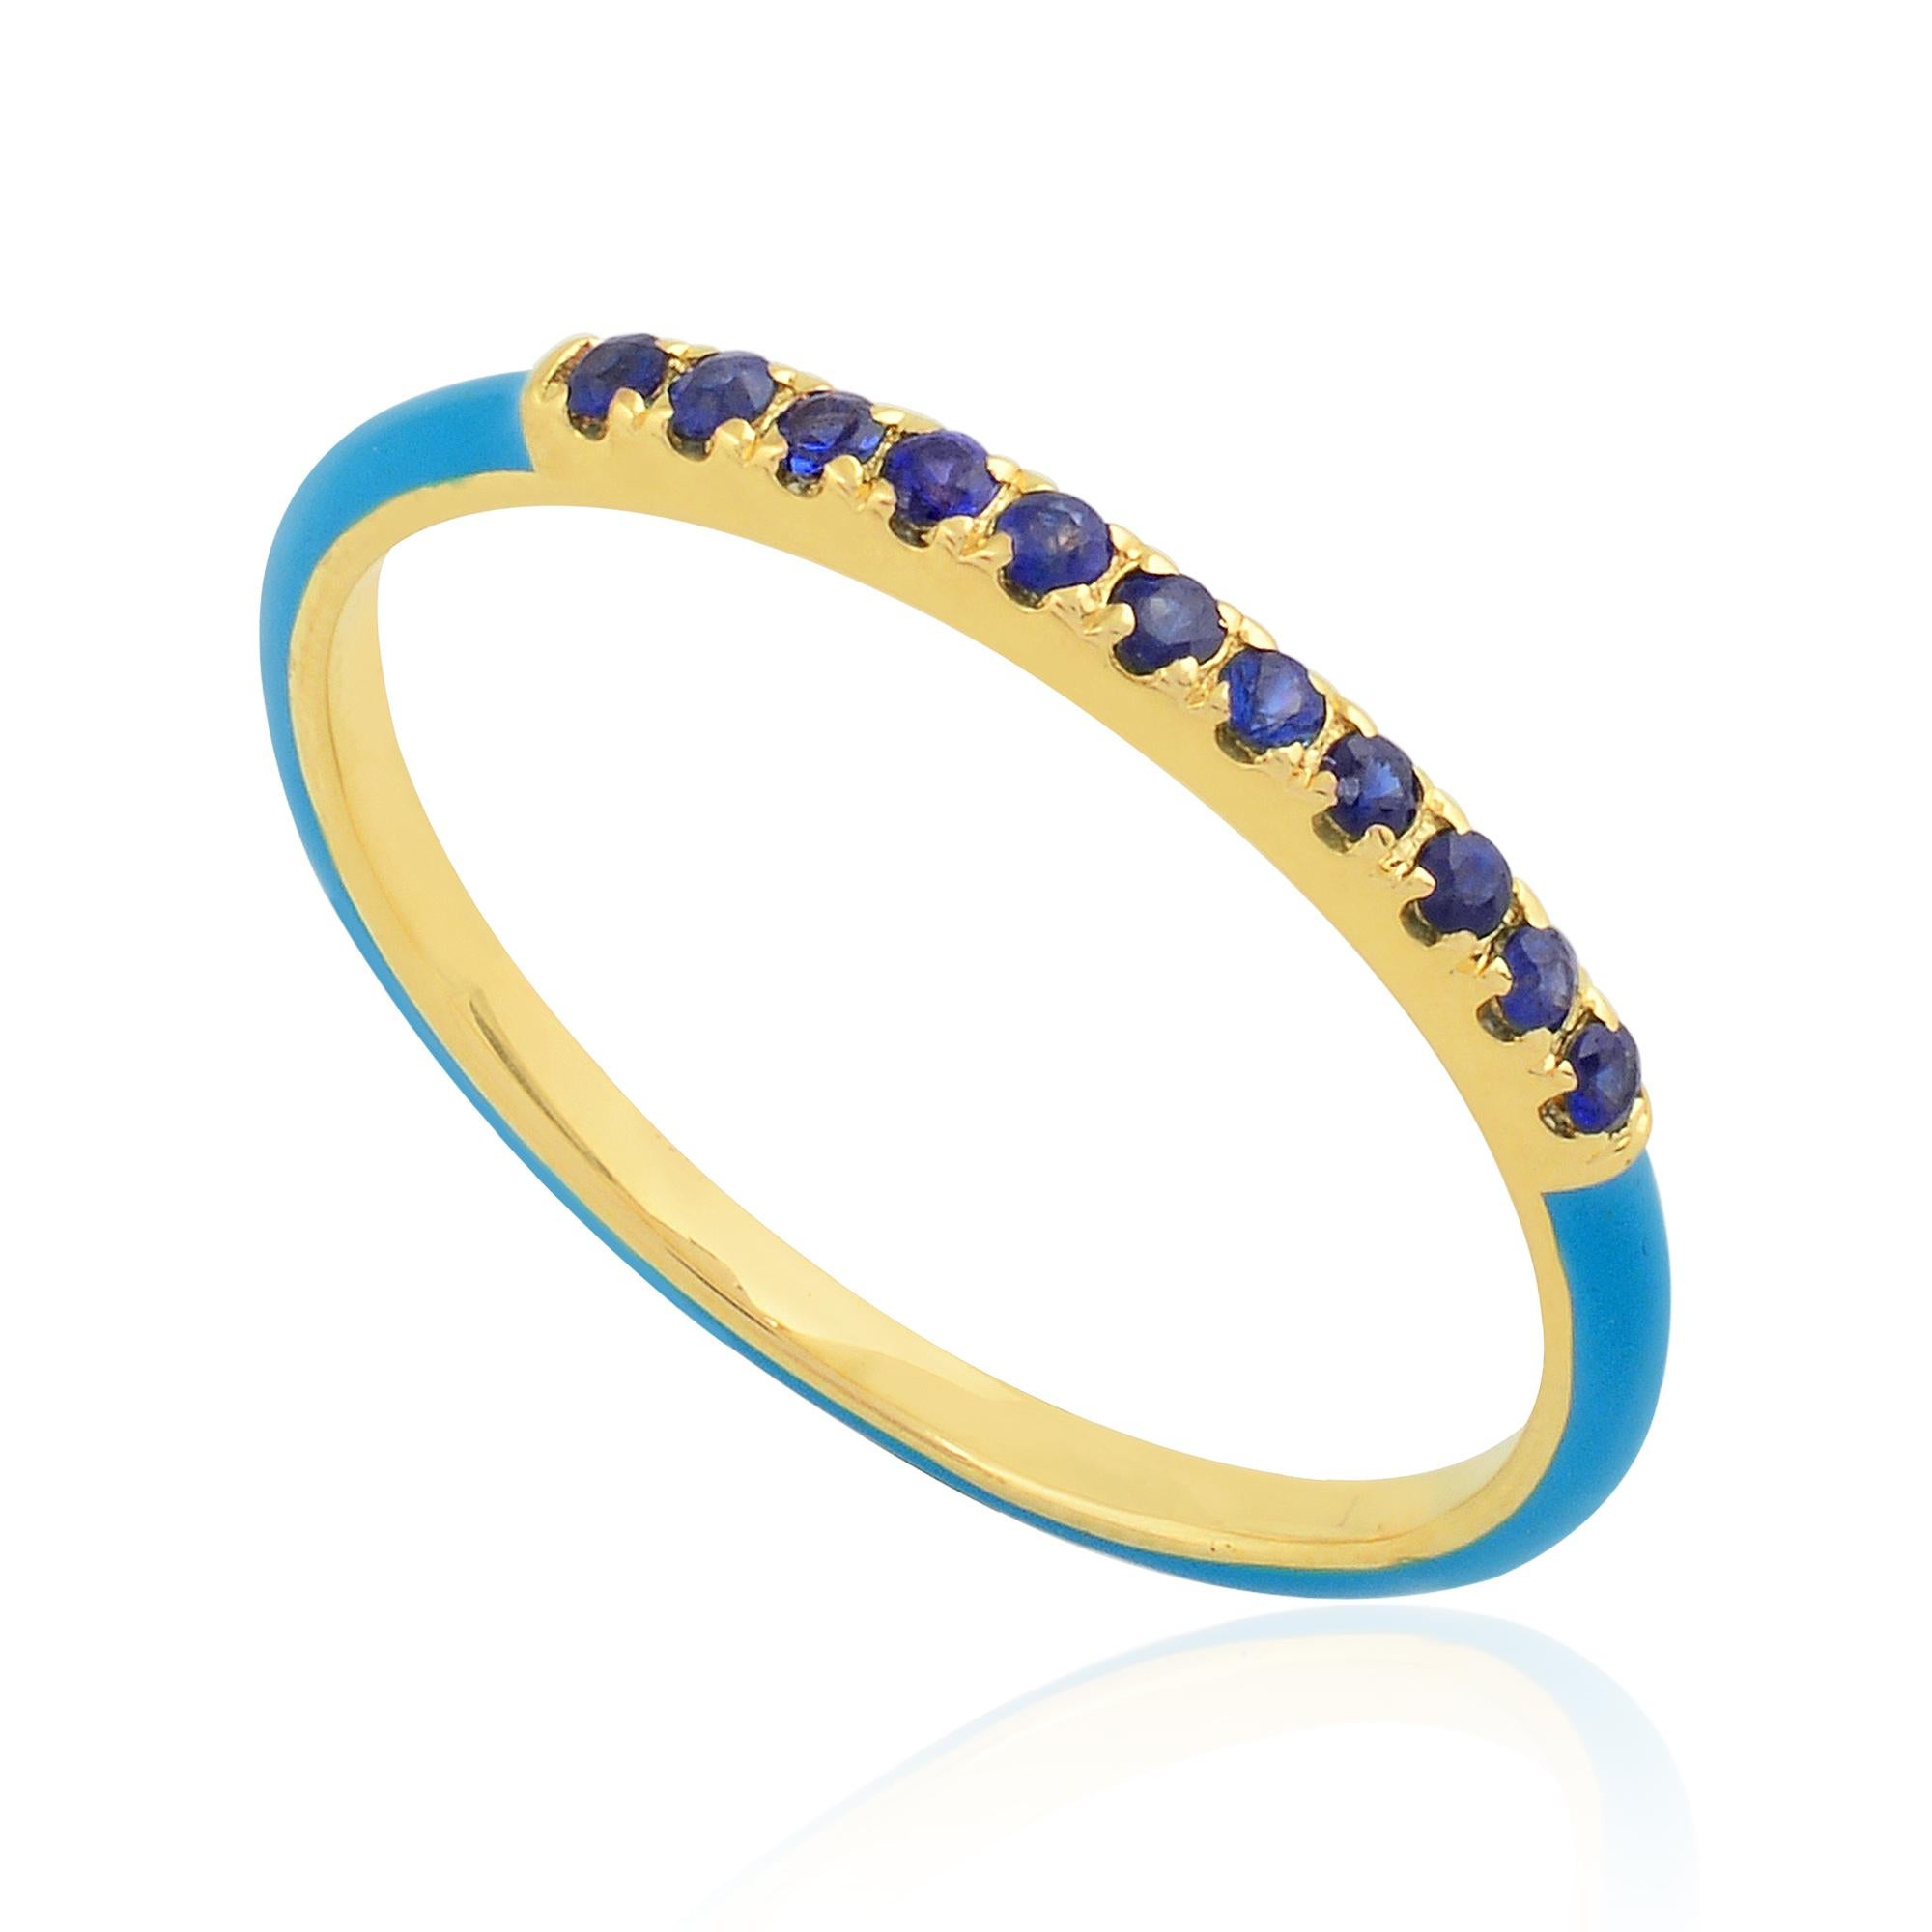 At the heart of this enchanting piece are the breathtaking blue sapphires, prized for their captivating hue and exceptional clarity. Each sapphire is carefully selected for its intense color and exquisite brilliance, ensuring that every stone on the